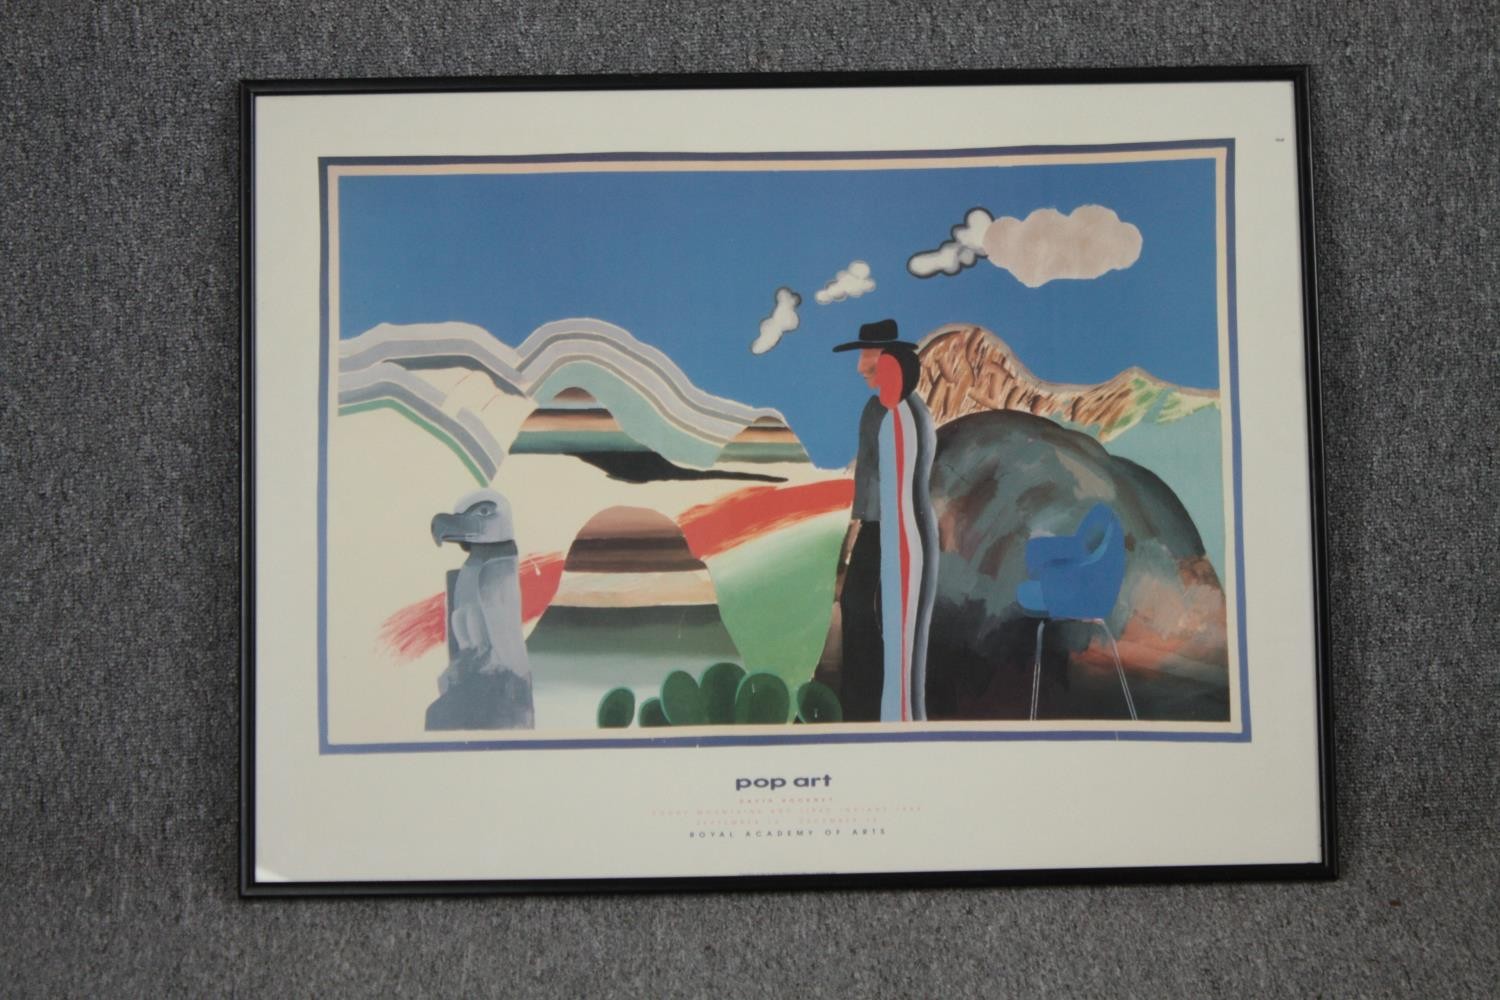 David Hockney. A poster printed by the Royal Academy for their Pop Art show which ran from Sep-Dec - Image 2 of 4